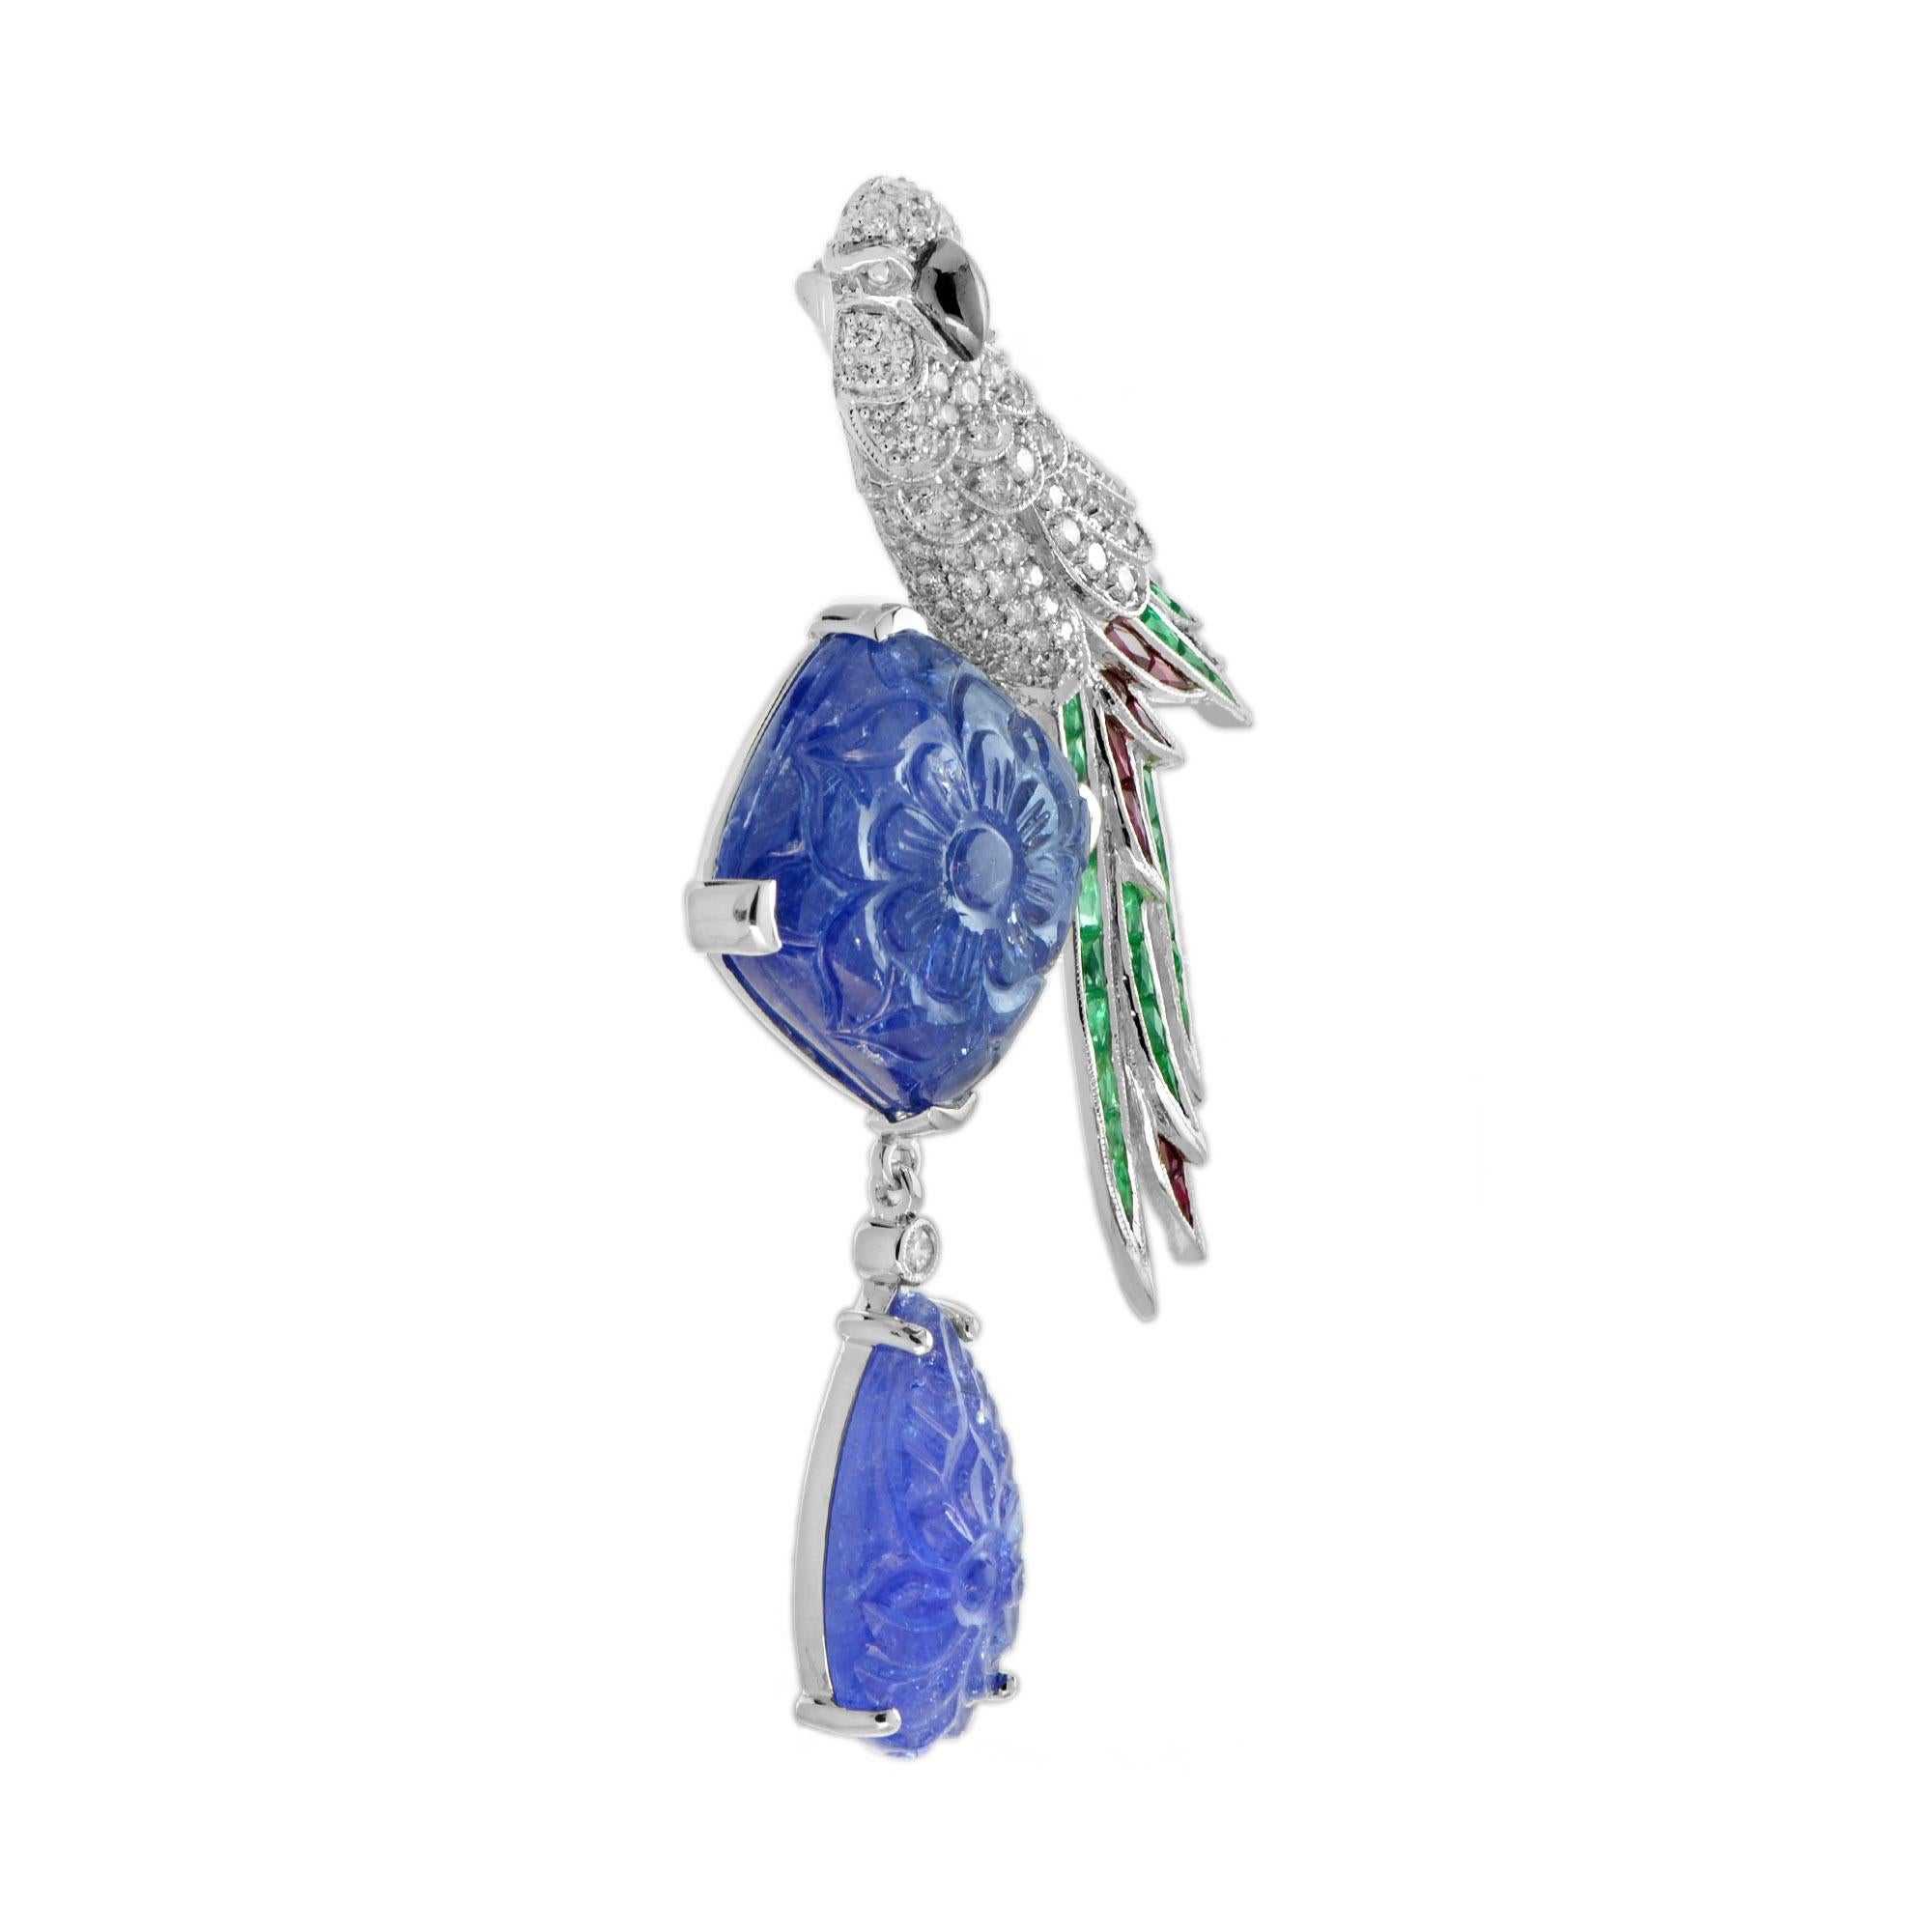 he bird brooch modeled in the form of a parrot perch upon a bloom. The highlight blooming flower formed by carved octagon and drop shaped tanzanite. The head and body features glittering sixty-one H color SI clarity diamonds while French cut